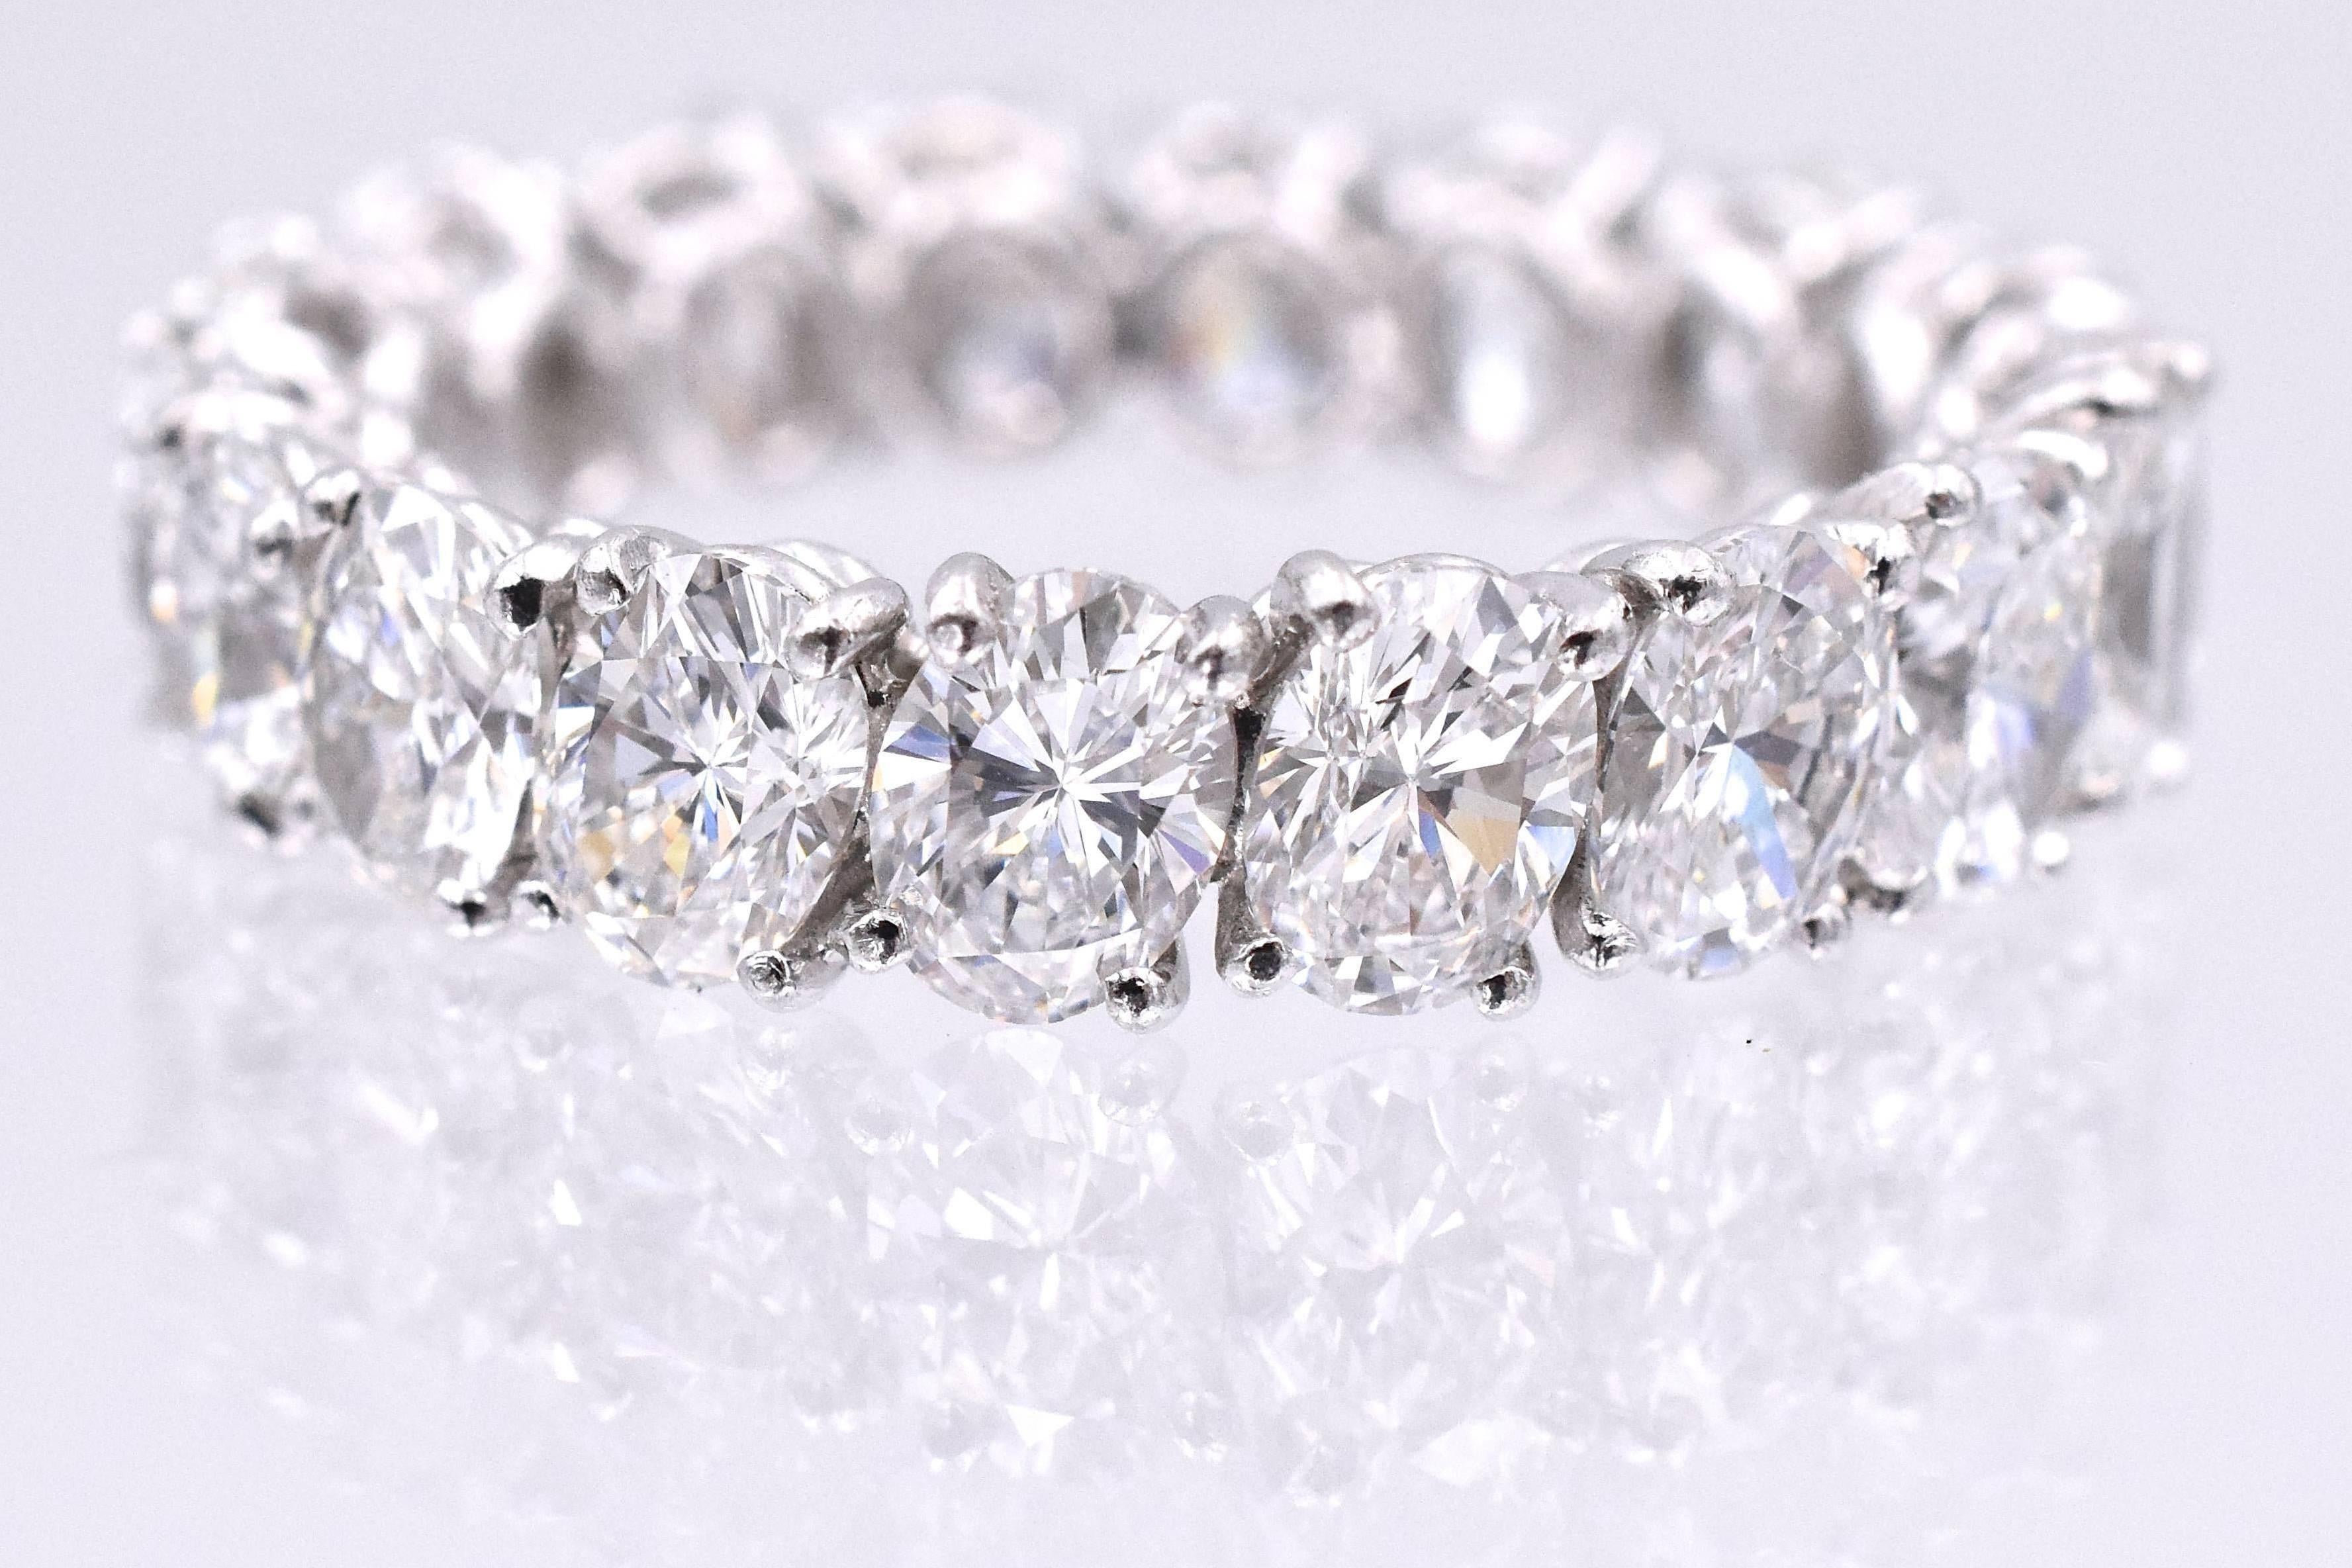 Elegant 18 oval shape diamonds set on a slant in platinum . Total weight of the diamonds is 5.05carats, each diamond is 0.28 carats, E/F color VS clarity.
The ring size is : 6
The ring width is: 5mm
Platinum

